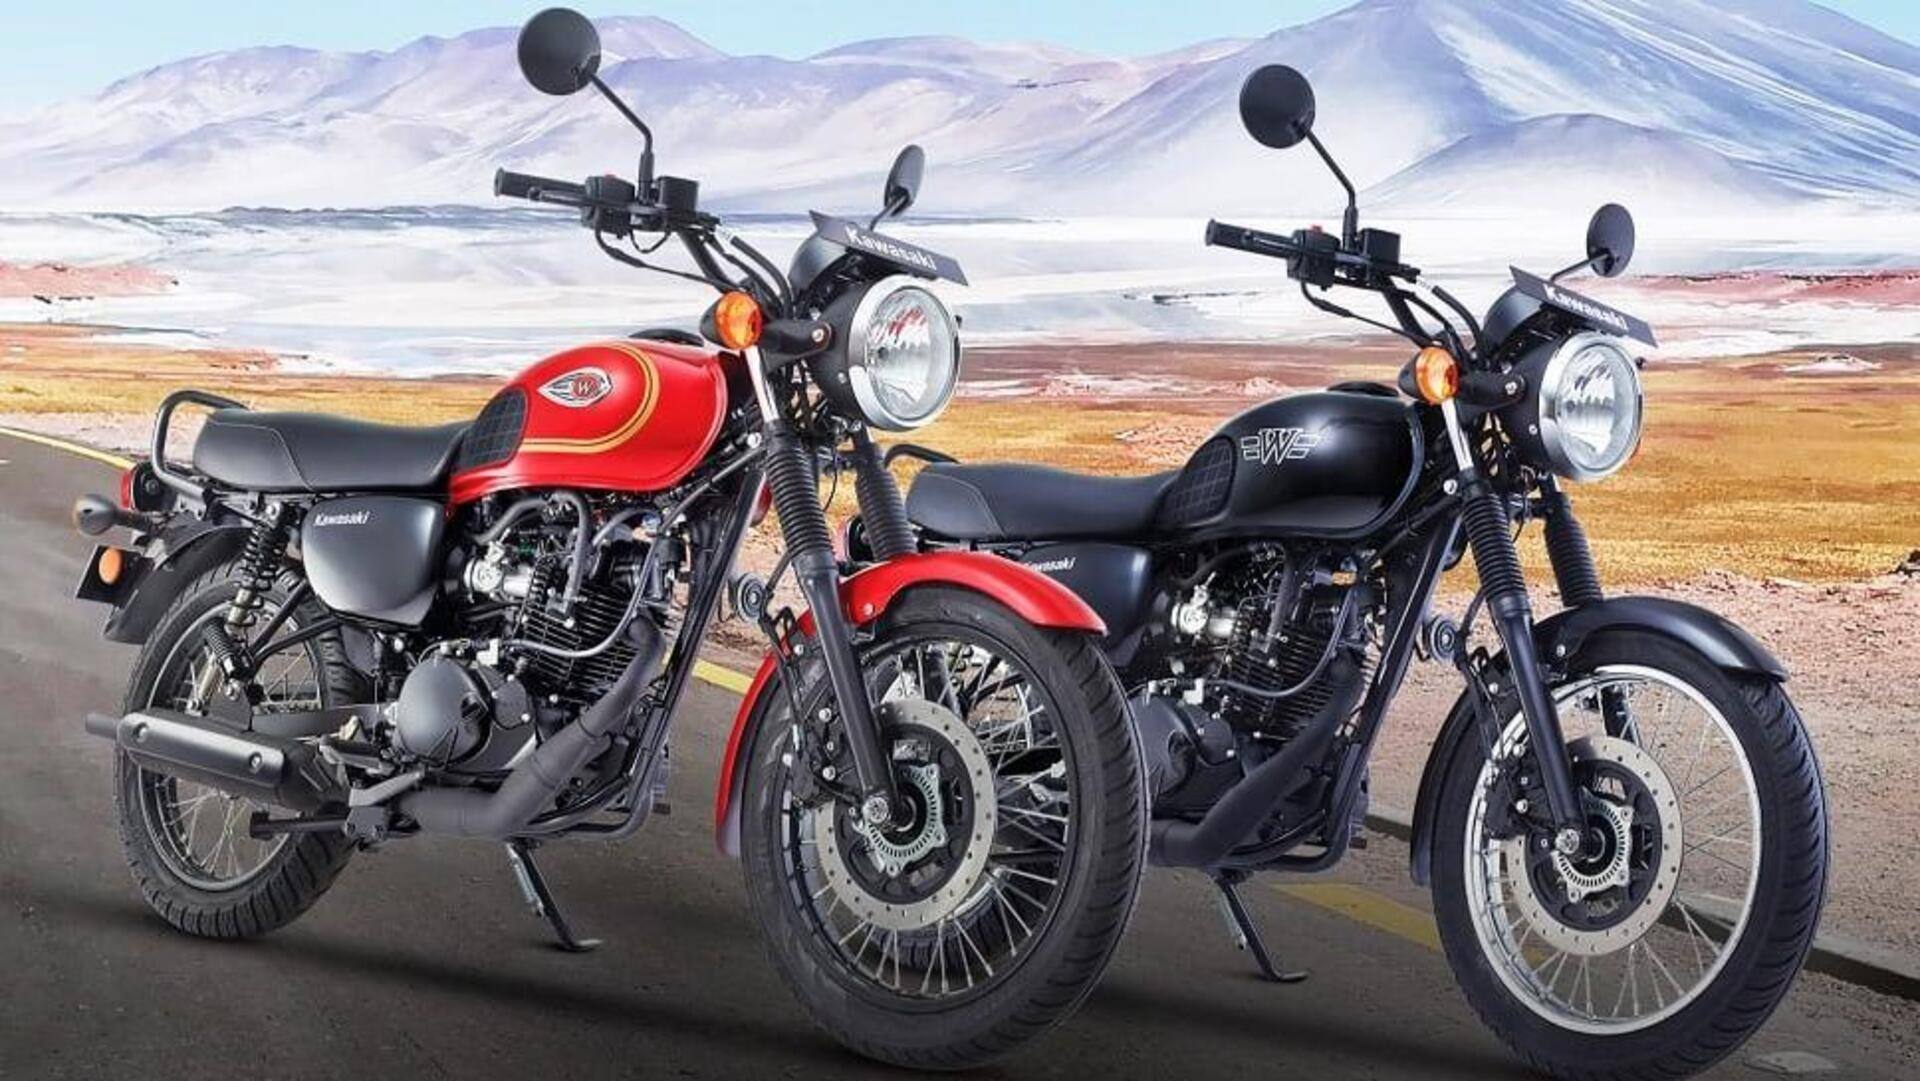 Kawasaki W175 gets Rs. 25,000 price cut; new colors introduced